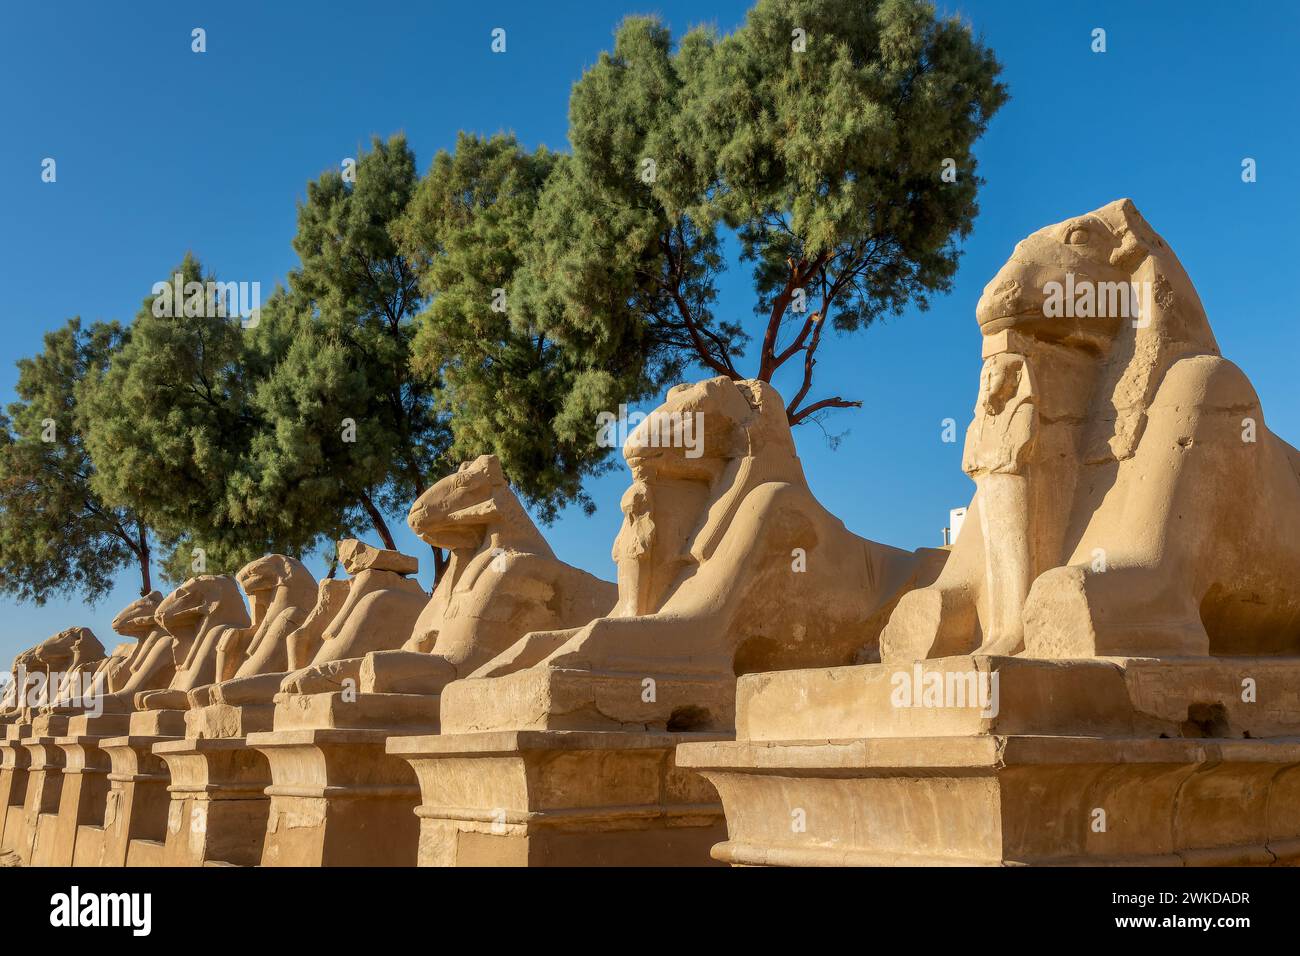 Ram-headed sphinxes in Karnak temple complex on the east bank of the Nile river in Luxor, Egypt Stock Photo